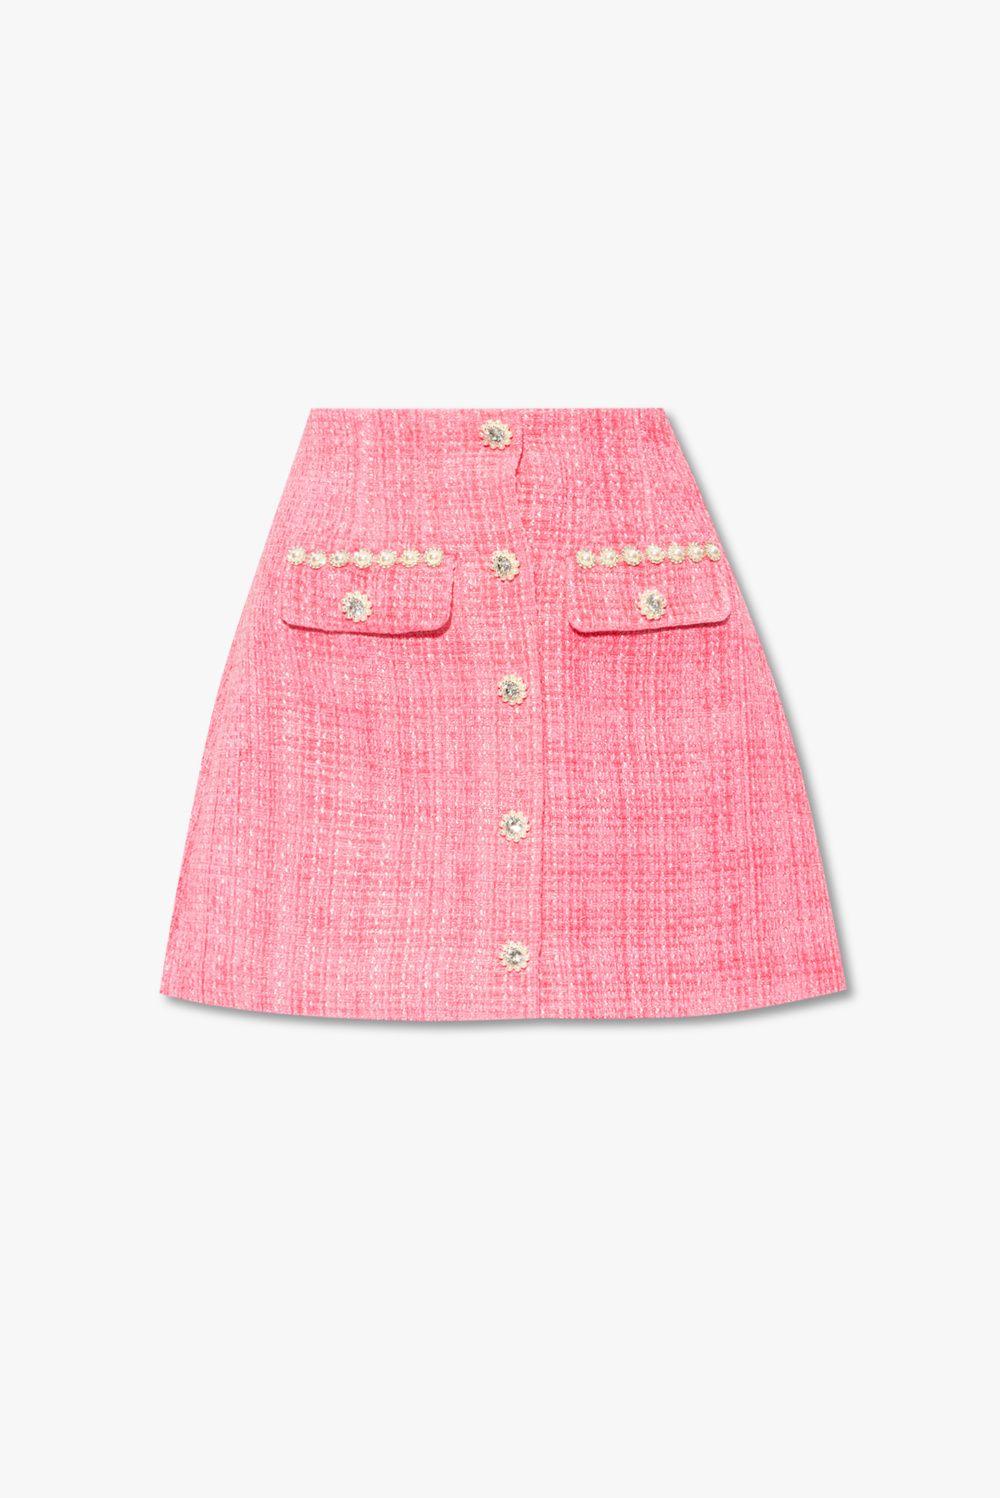 Self-Portrait Skirt With Decorative Buttons in Pink | Lyst